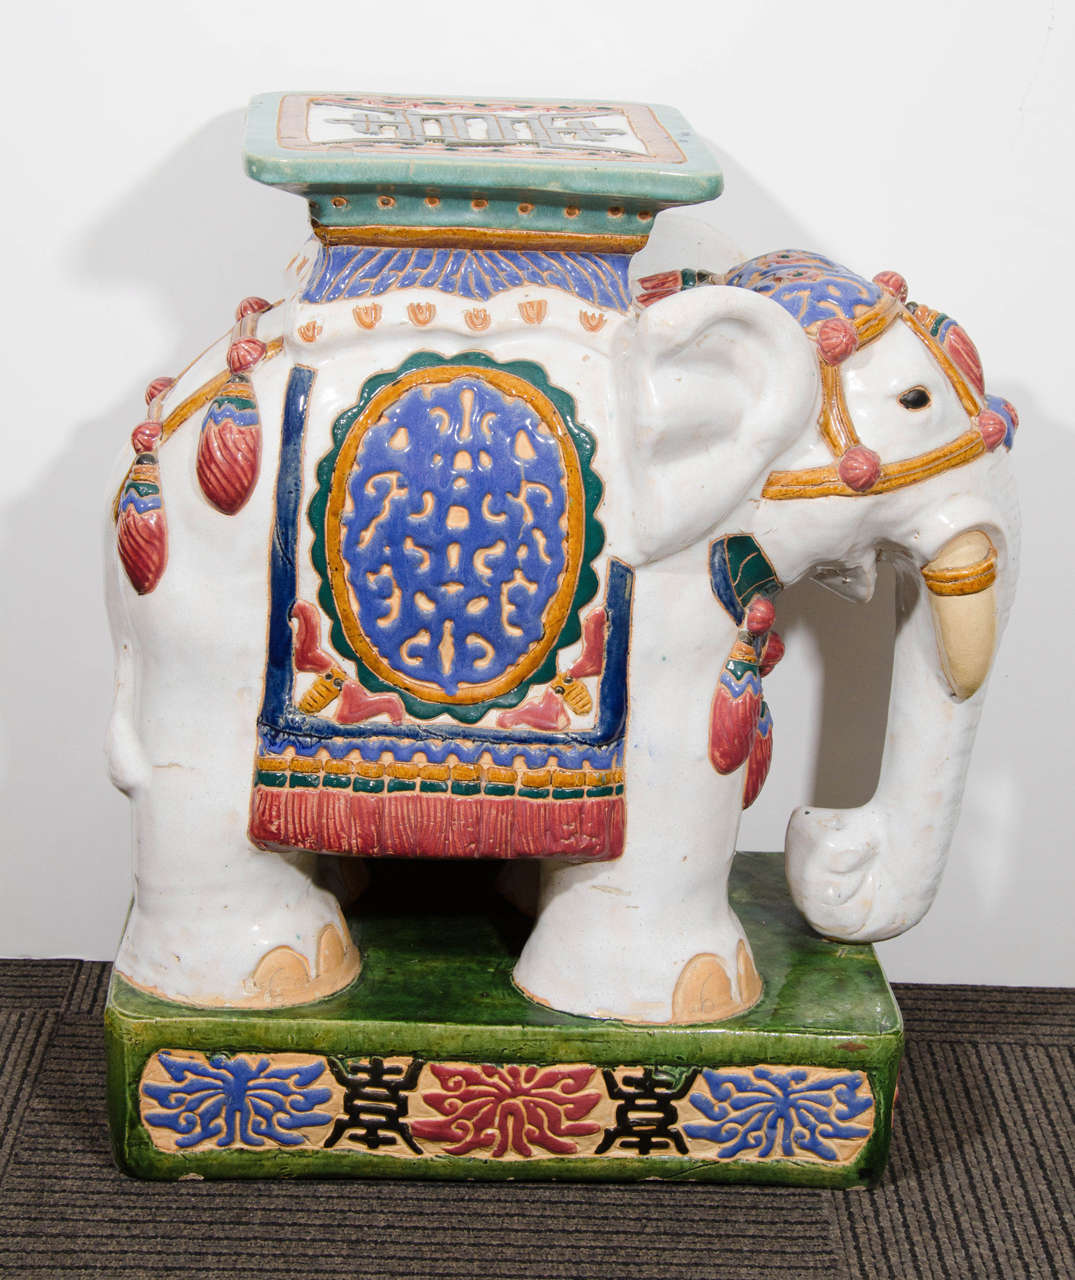 A vintage pair of decorative Asian inspired ceramic elephant garden seats or stools. Can also be used as end or side tables if you add glass tops. Good vintage condition with age appropriate wear. There is a chip to one seat and a few nicks to the